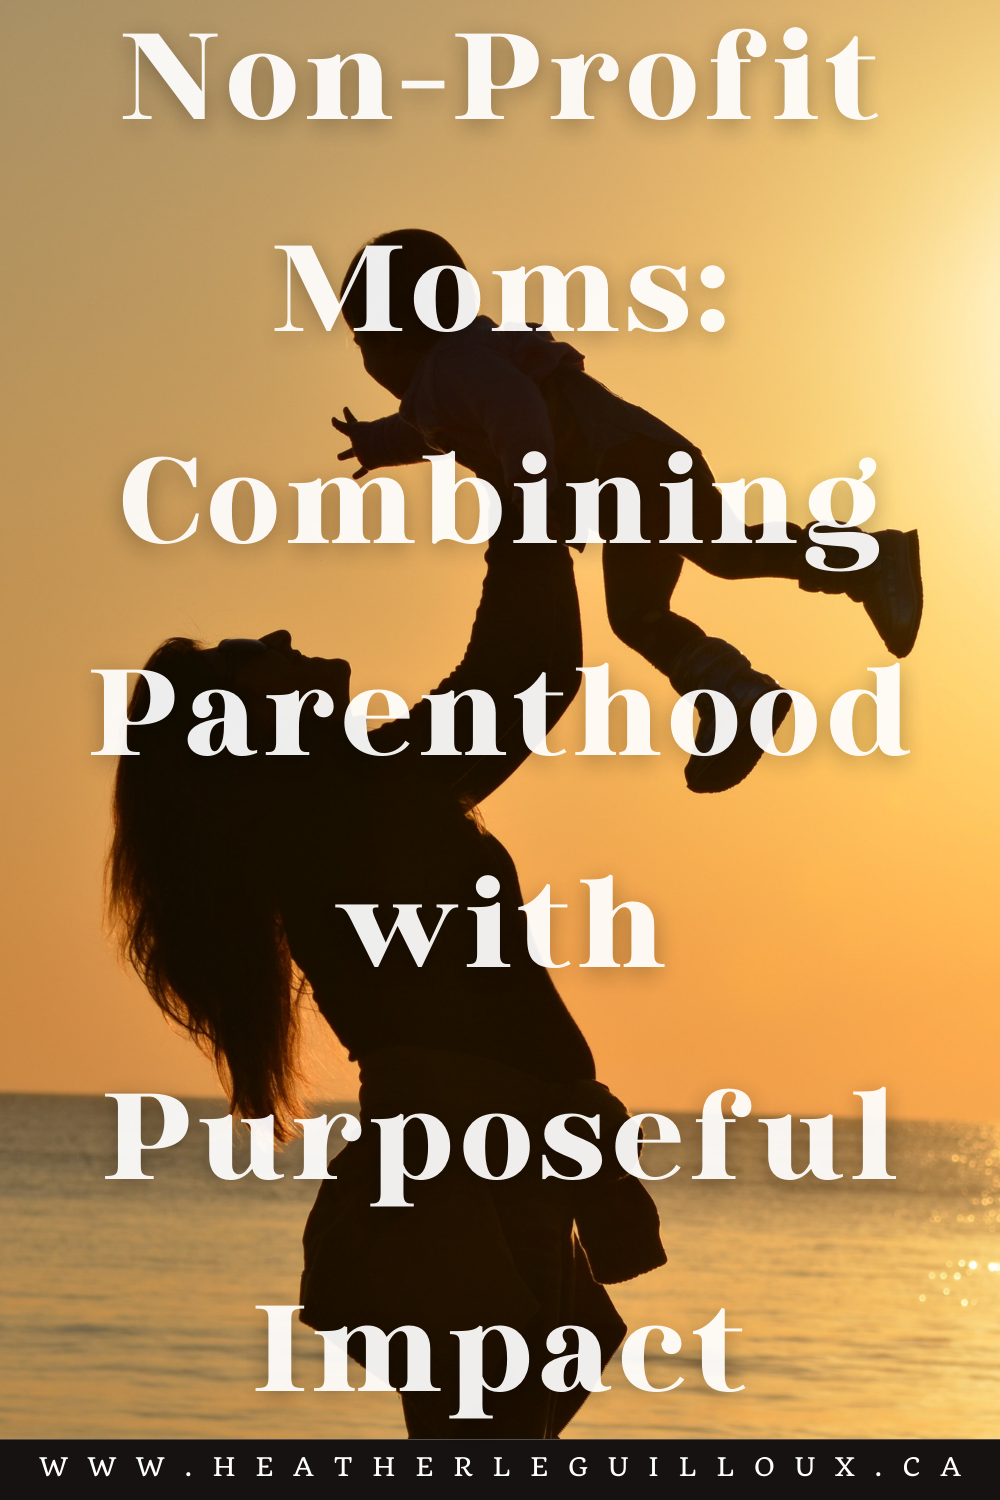 Many mothers feel a calling beyond their family responsibilities. Balancing life as a parent while contributing to a greater purpose forms the nexus of the modern, purpose-driven mom. This article focuses on the journey of mothers in the non-profit sector, who've managed to unite their parenting roles with making a meaningful impact in the world. #nonprofit #moms #parenthood